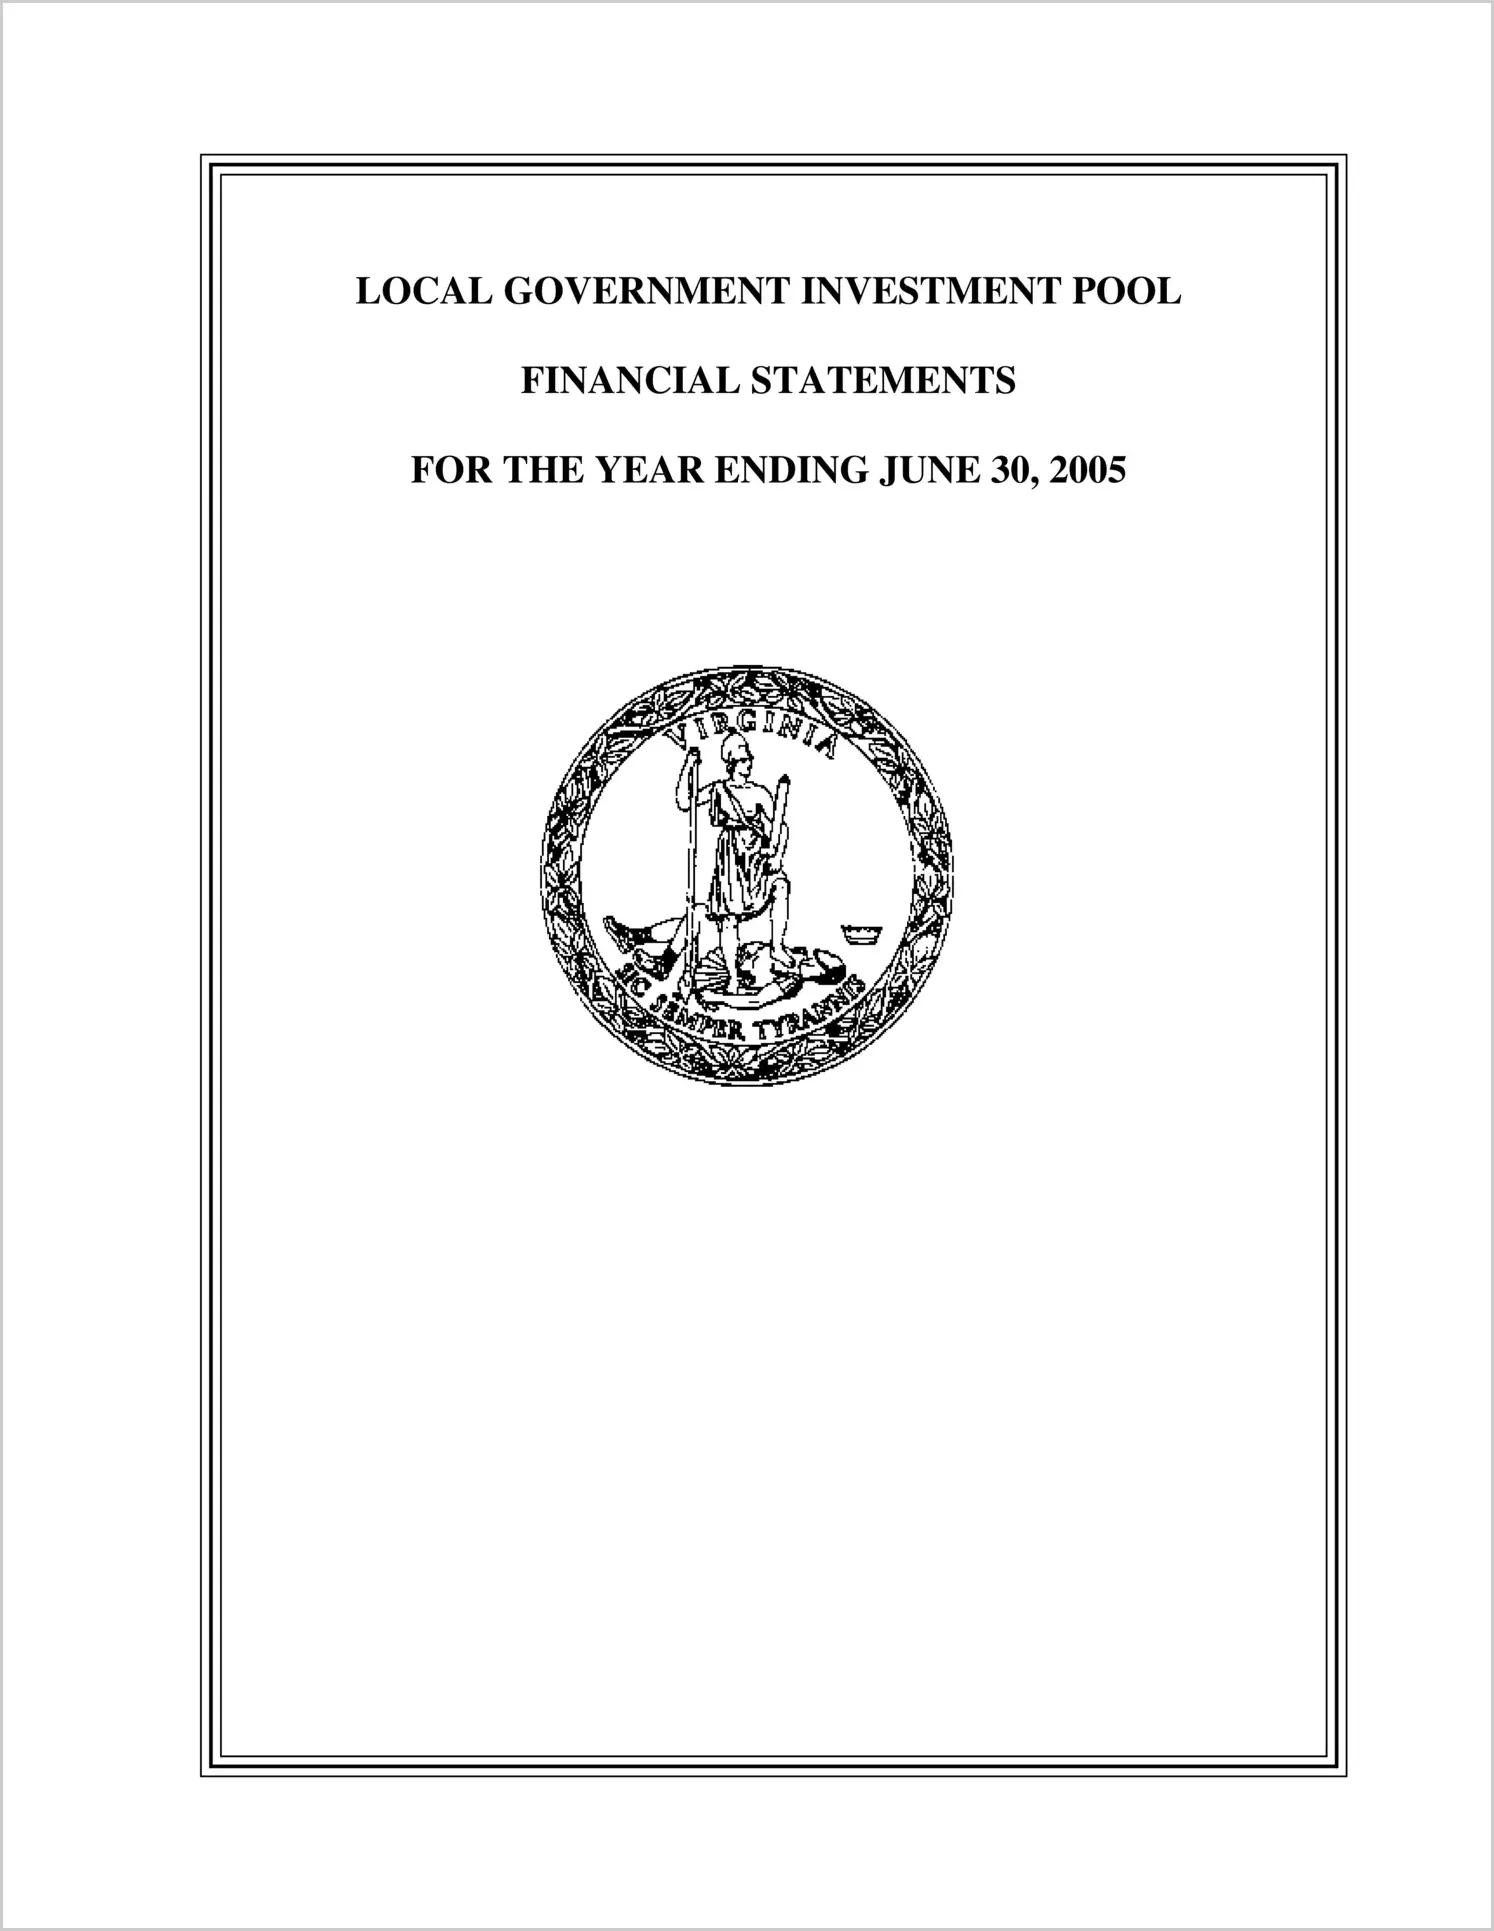 Local Government Investment Pool for the year ended June 30, 2005